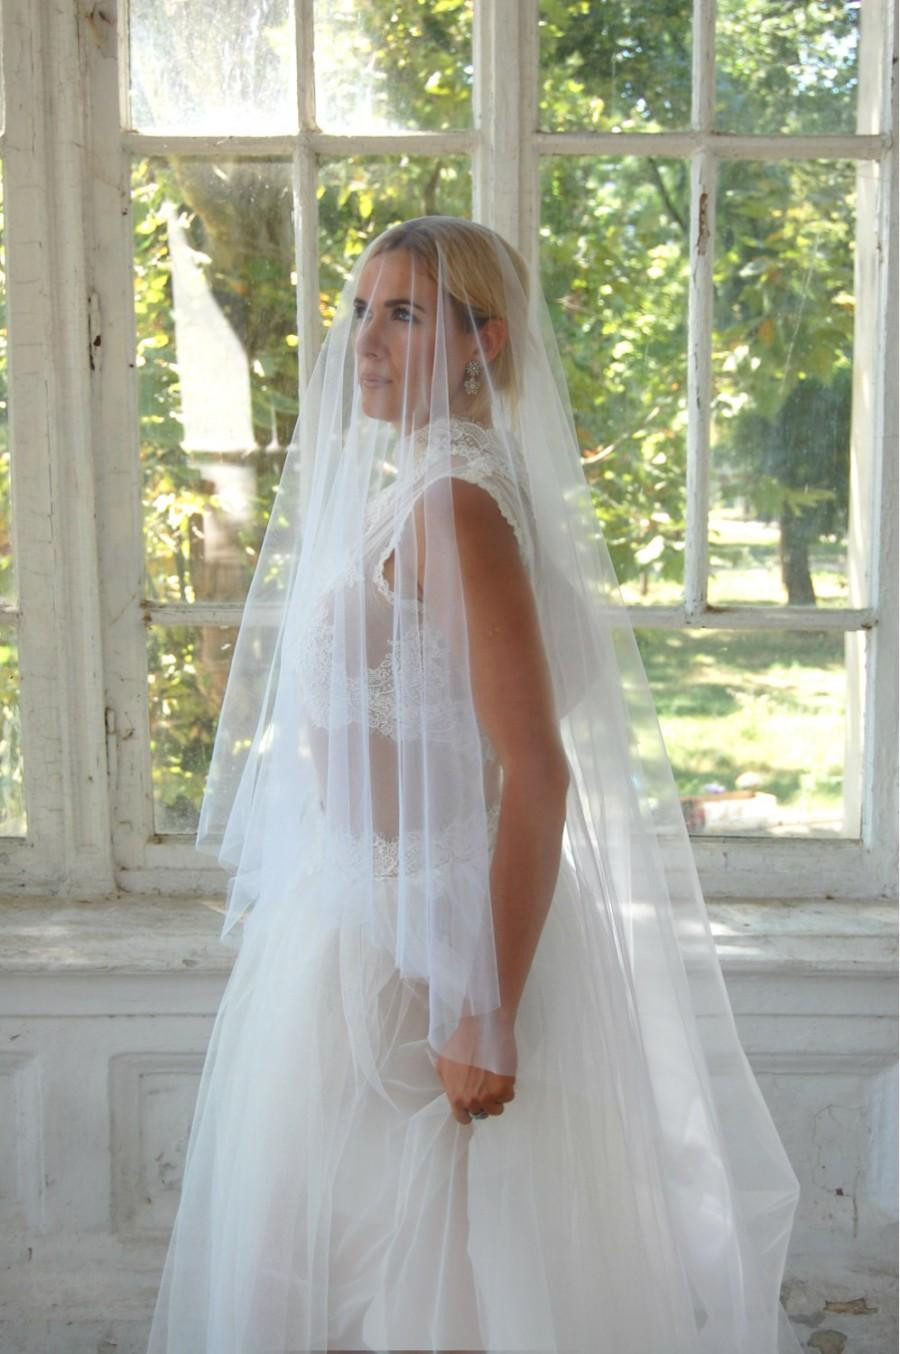 Cathedral Style Wedding Veils
 Wedding Veil Drop Veil Cathedral Veil With Blasher